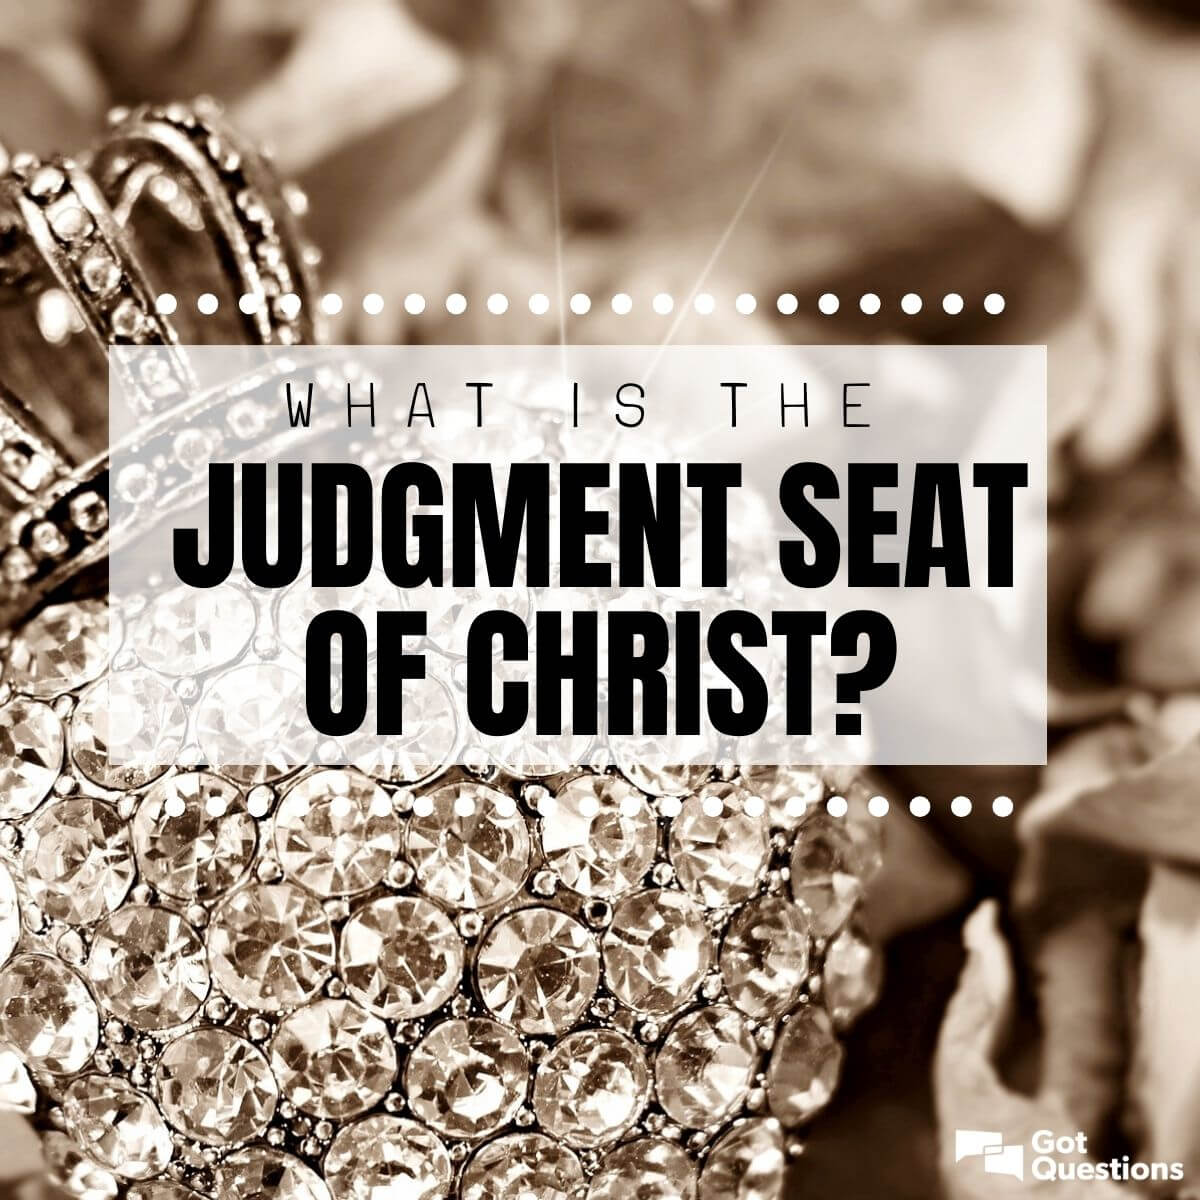 we shall all stand before the judgment seat of christ